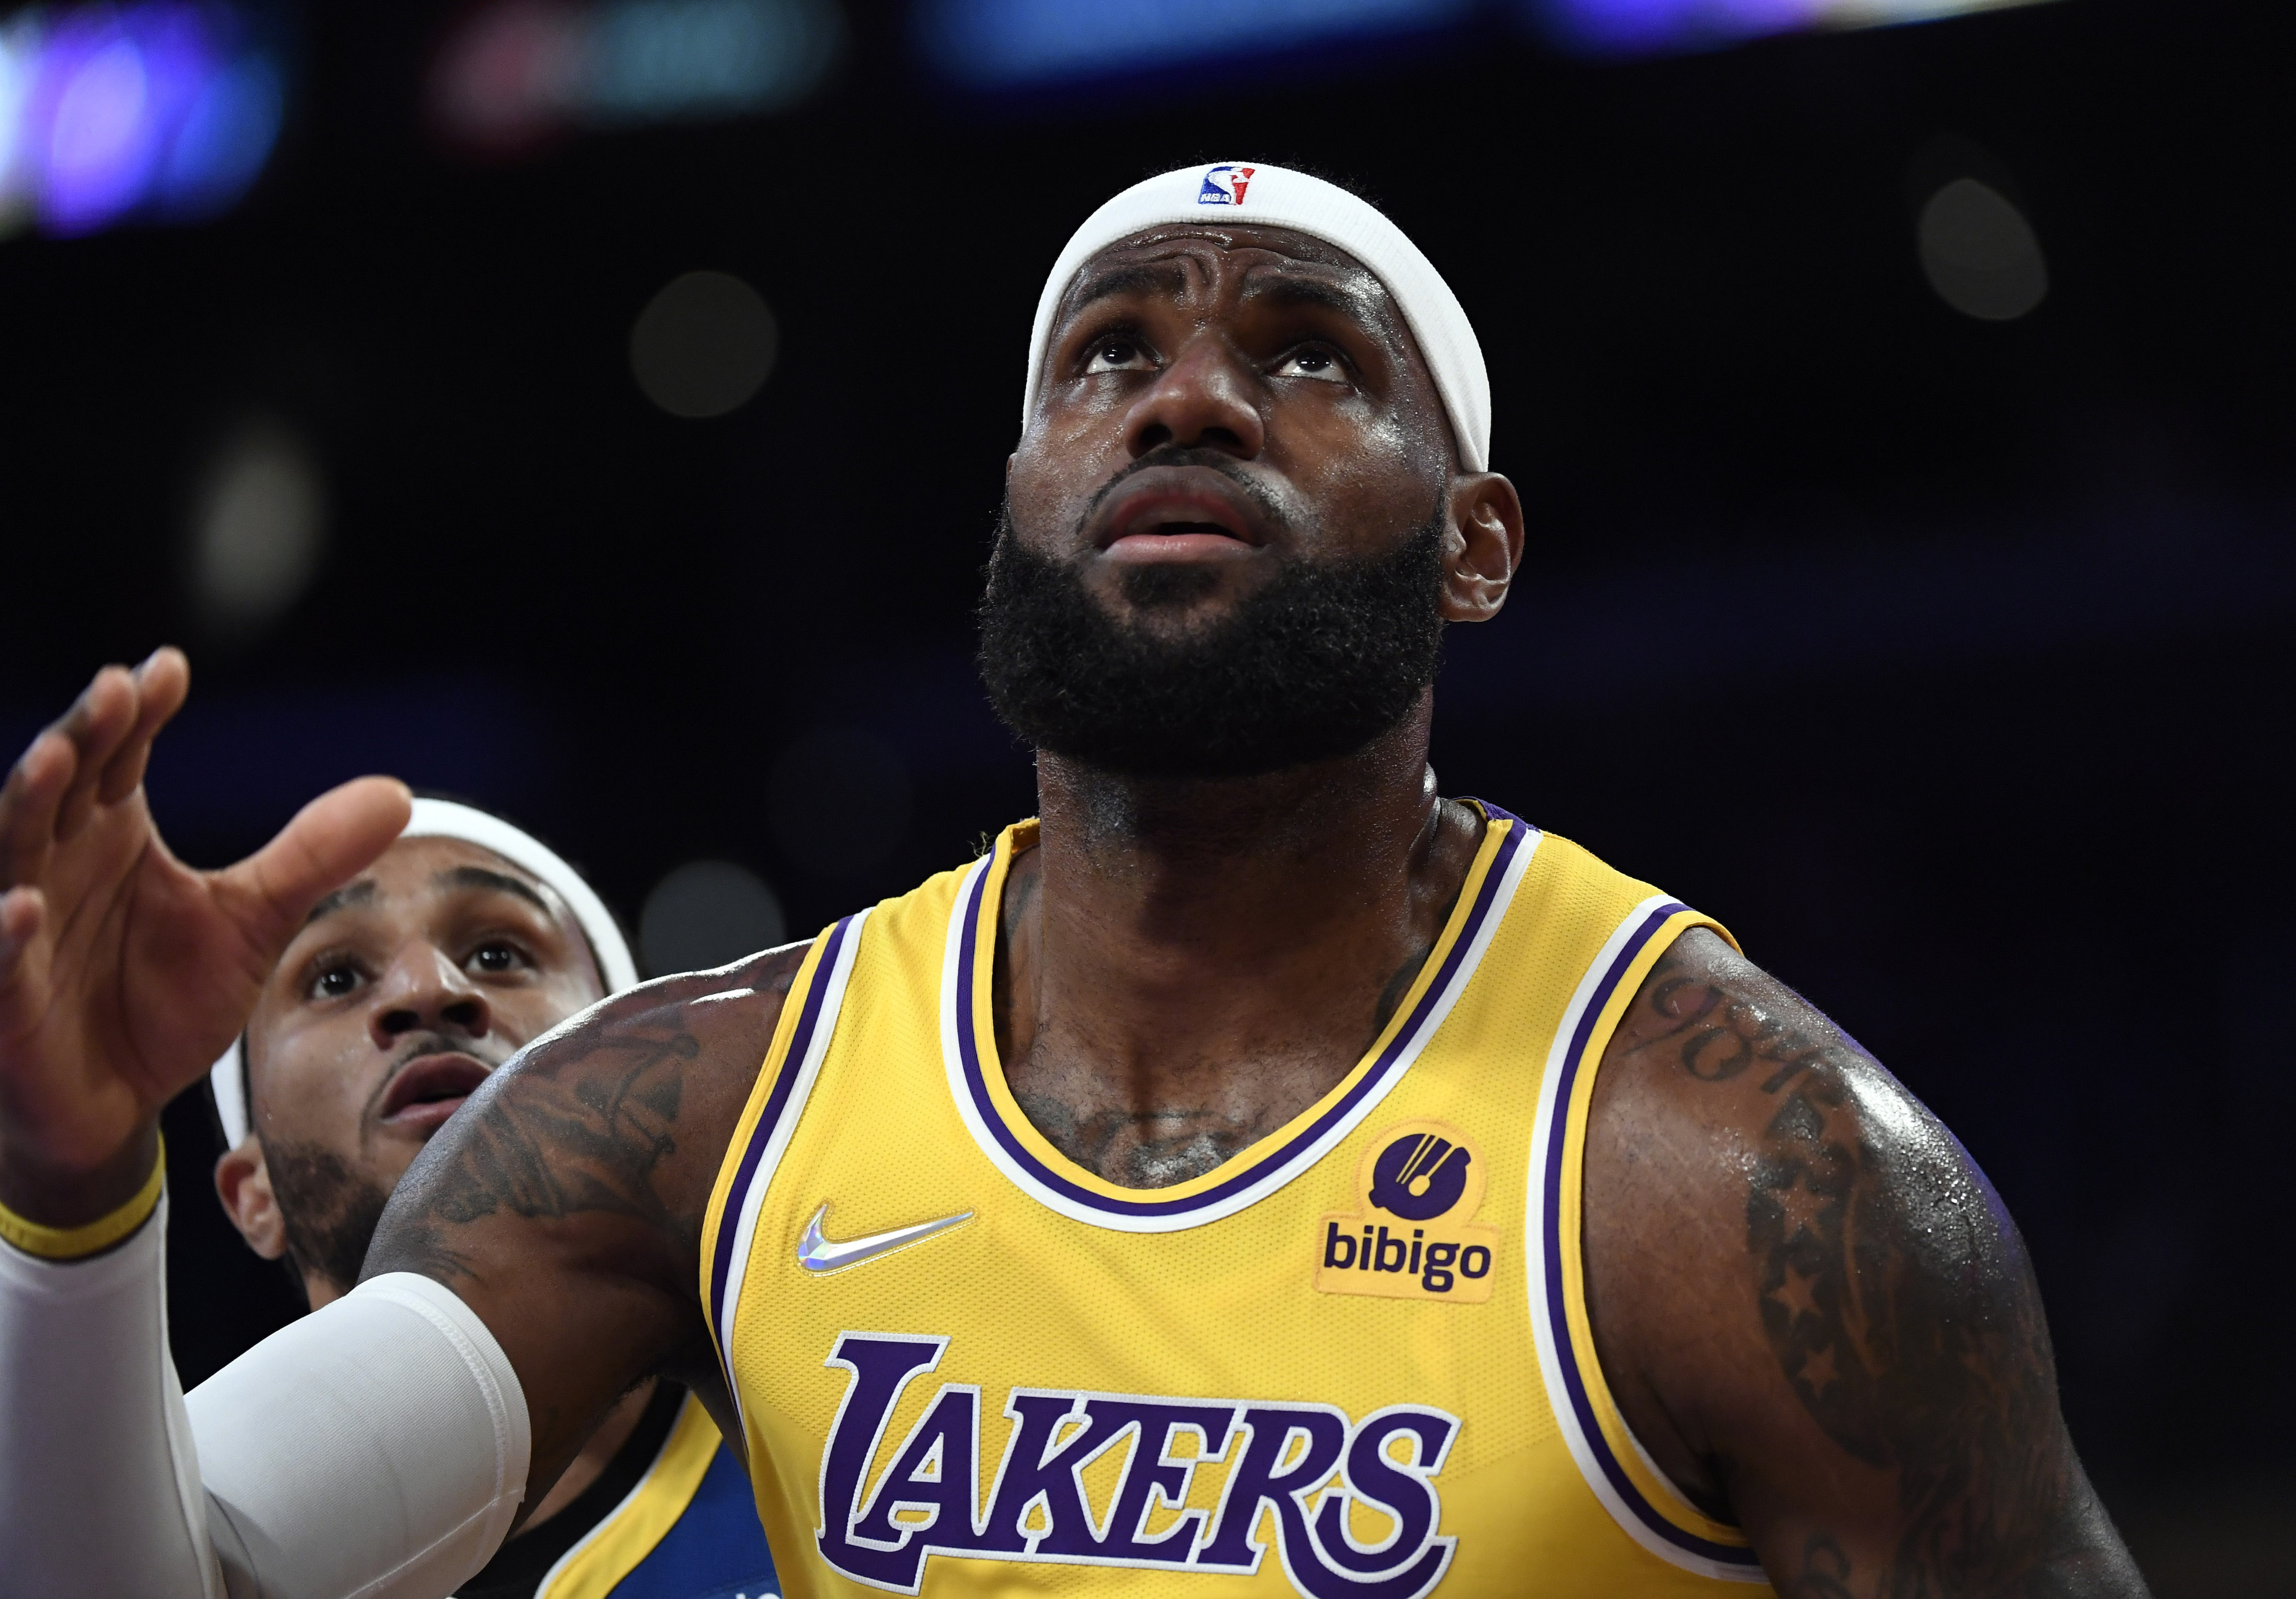 Los Angeles Lakers star LeBron James awaits a rebound during a preseason game